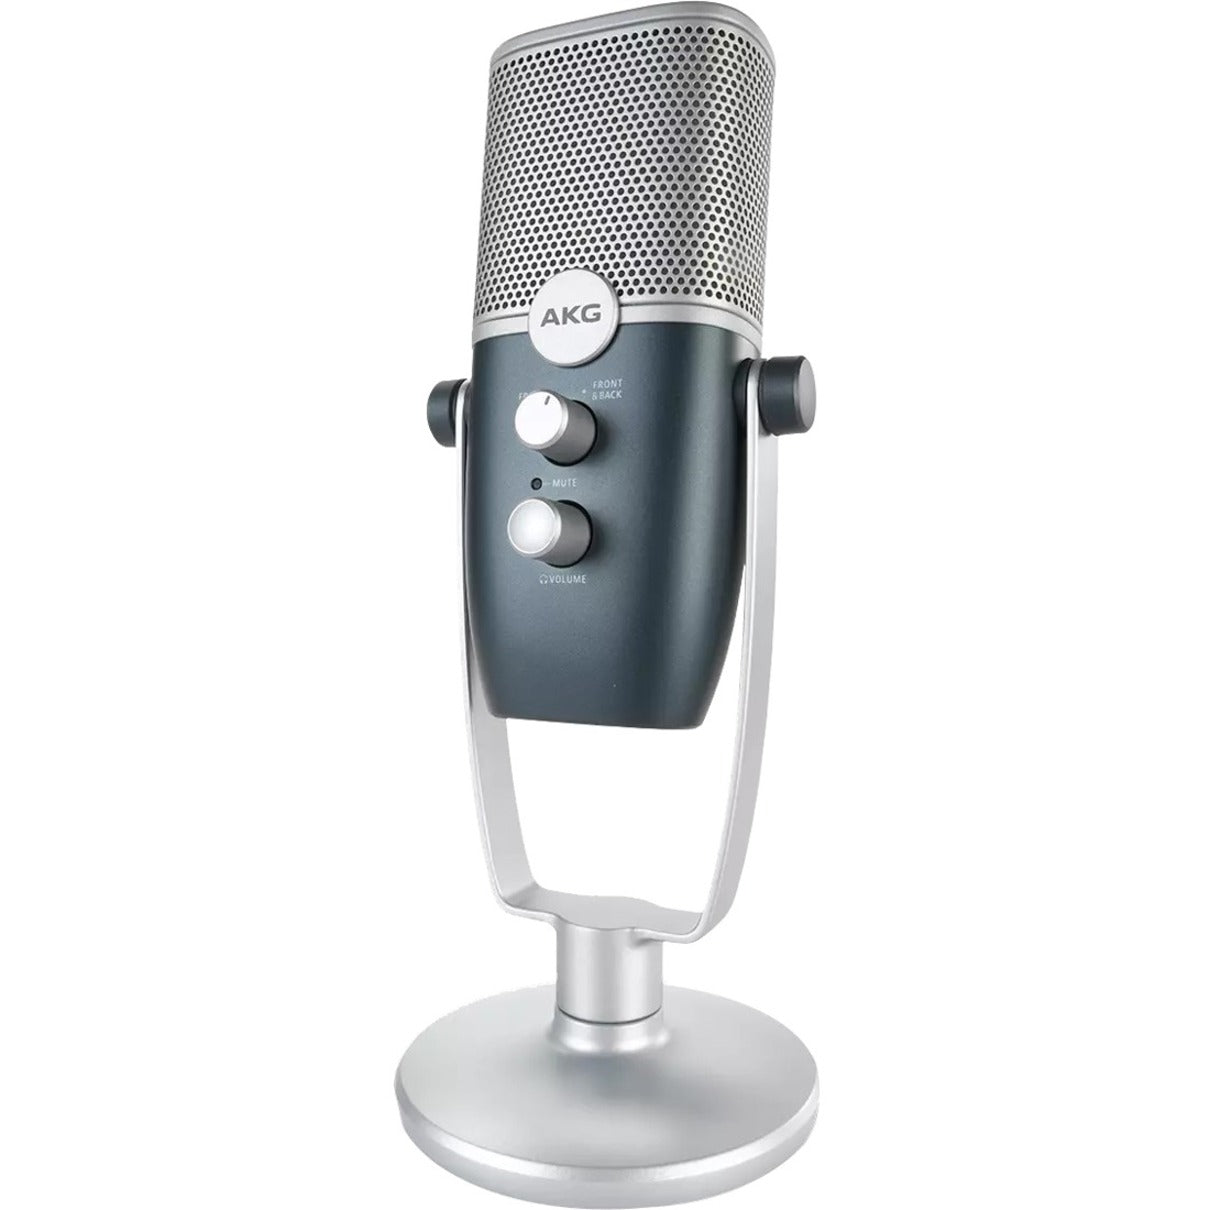 AKG AKG-C22-USB Ara Professional Dual-pattern USB Condenser Microphone, Omni-directional, Directional, Cardioid, Boom, Stand Mountable, Desktop, Video Blogging, Video Conferencing, Live Streaming, Podcasting, Recording, Gaming, Mac, iOS, Android, PC